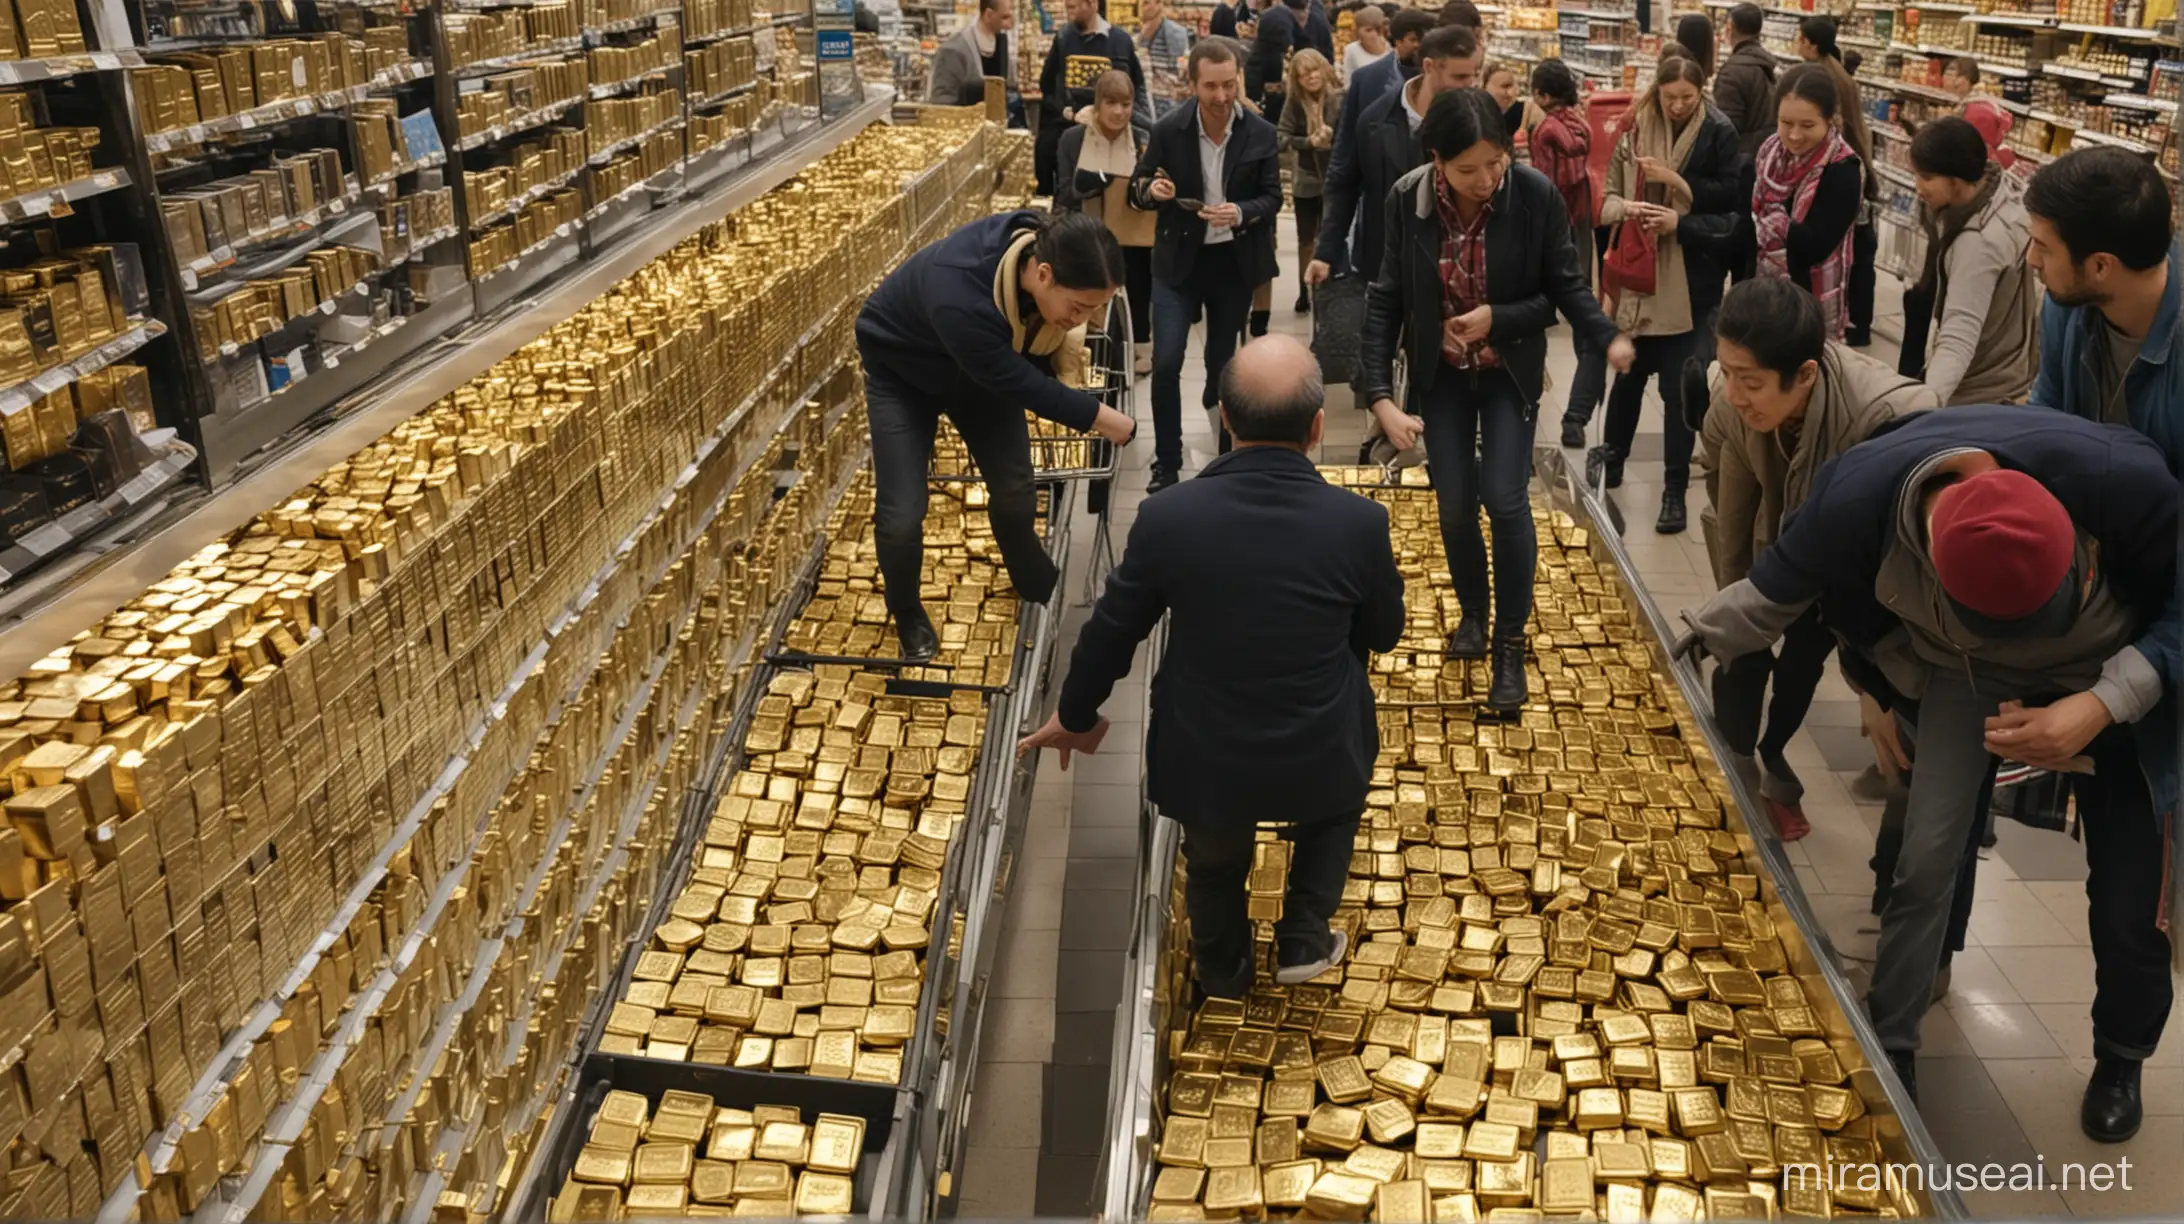 Crowded Supermarket Scene Shoppers Rushing for Gold Bars and Coins